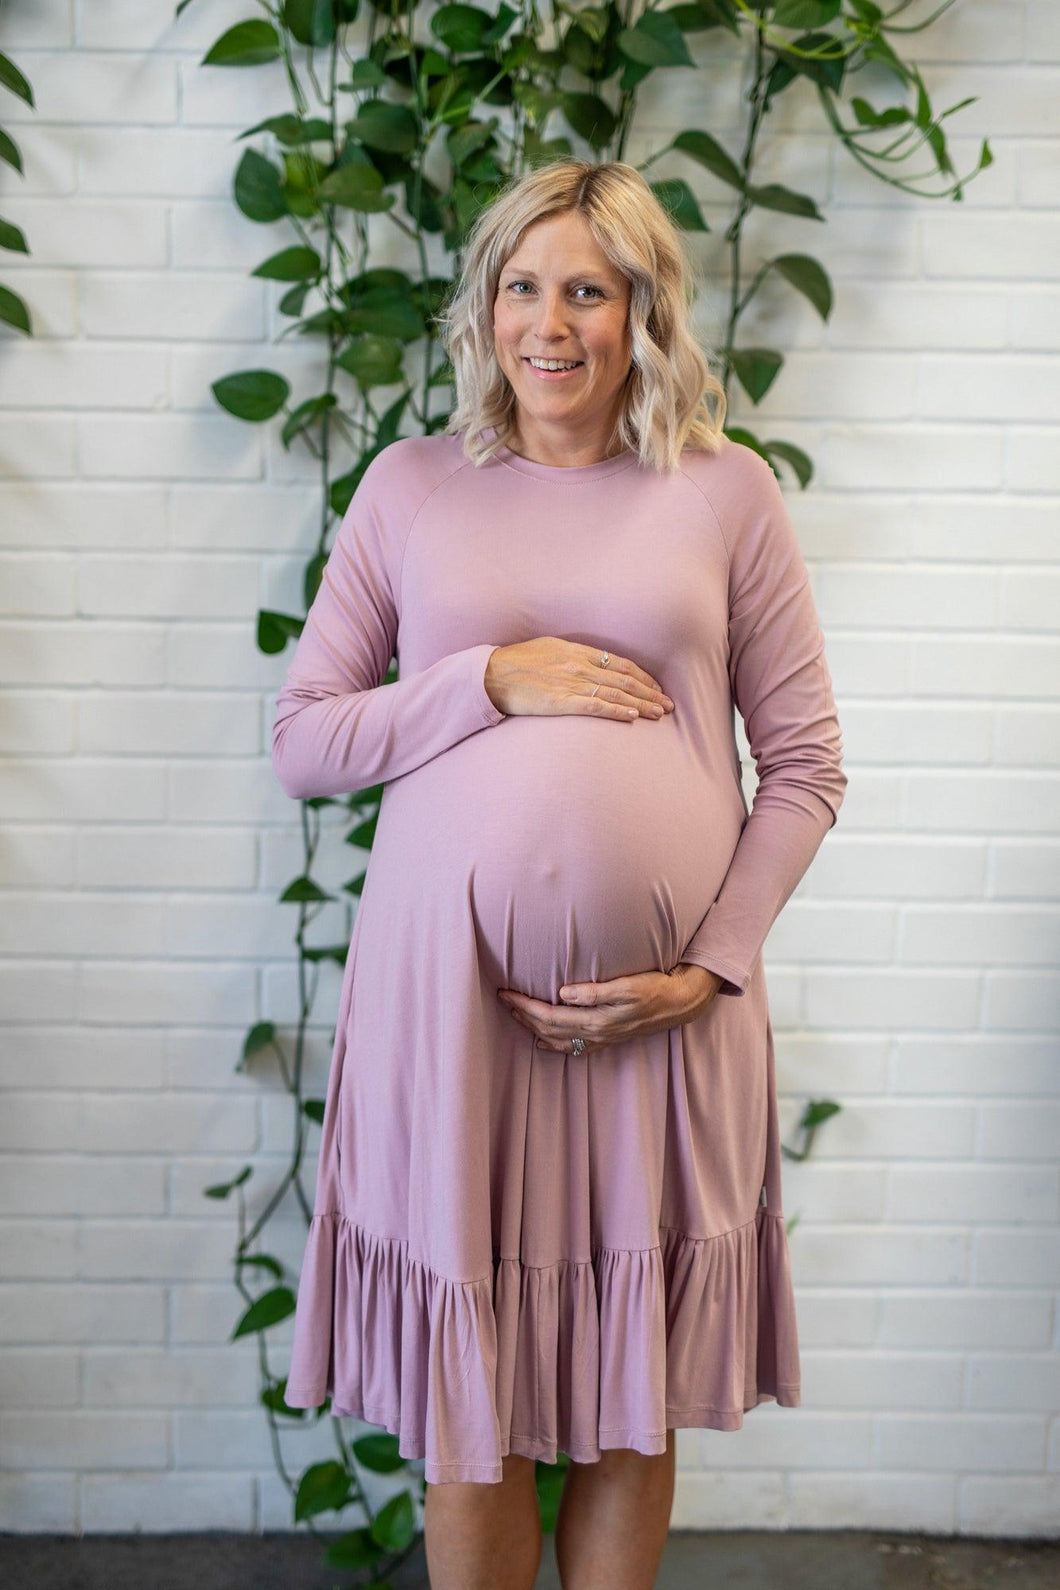 Pregnant lady holding her baby bump in a pink dress